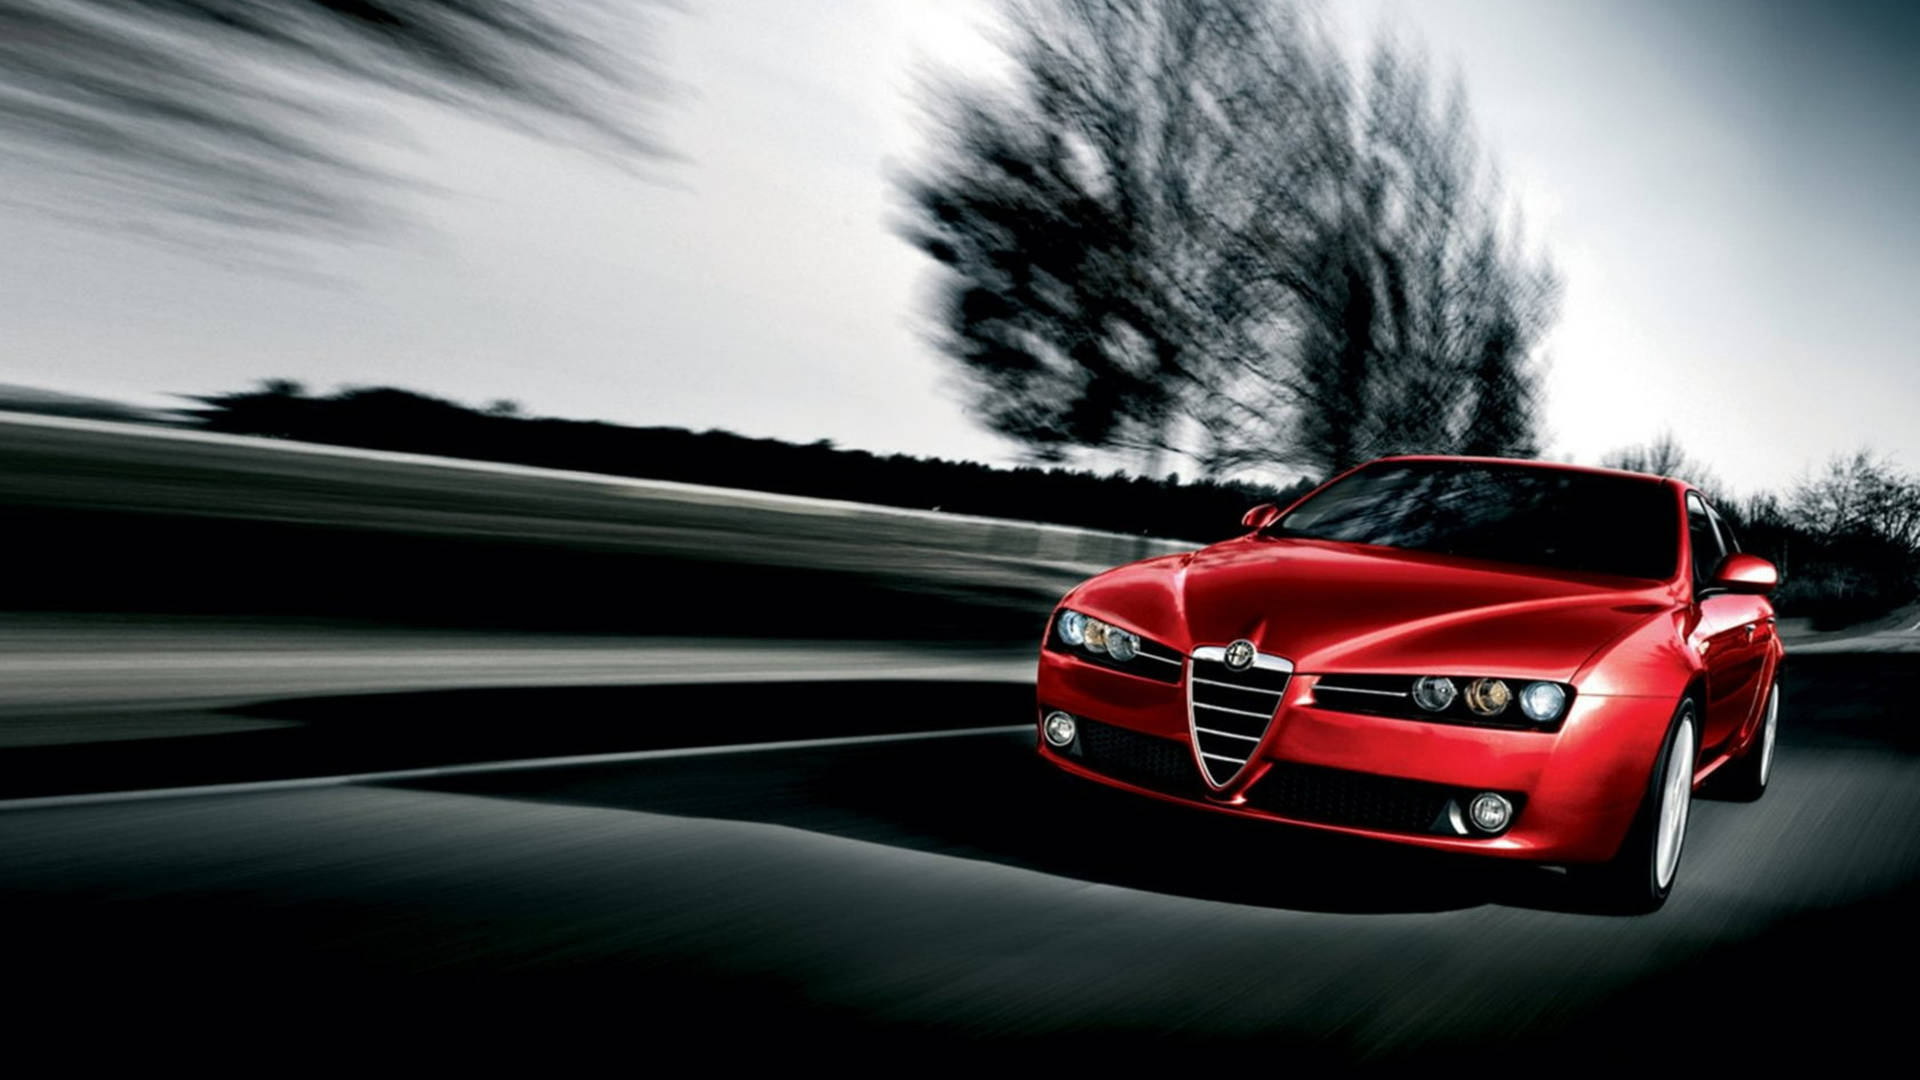 Experience the thrilling performance of the Alfa Romeo 159 Wallpaper